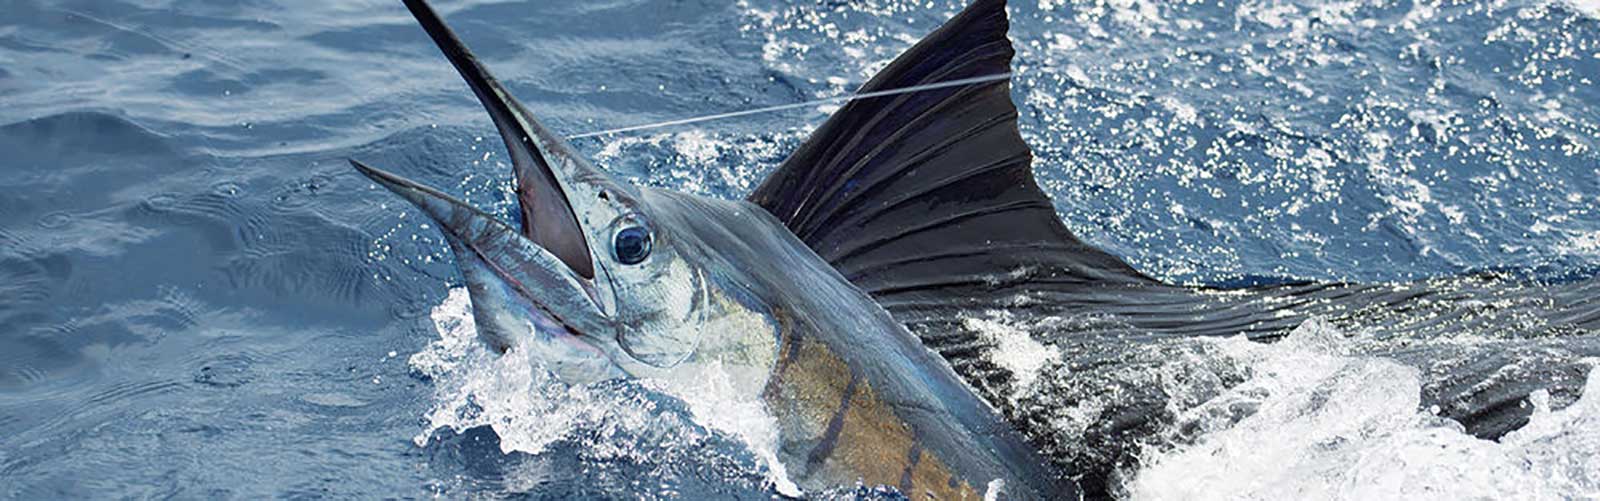 What City Holds the Title as the Sailfish Capital of the World?